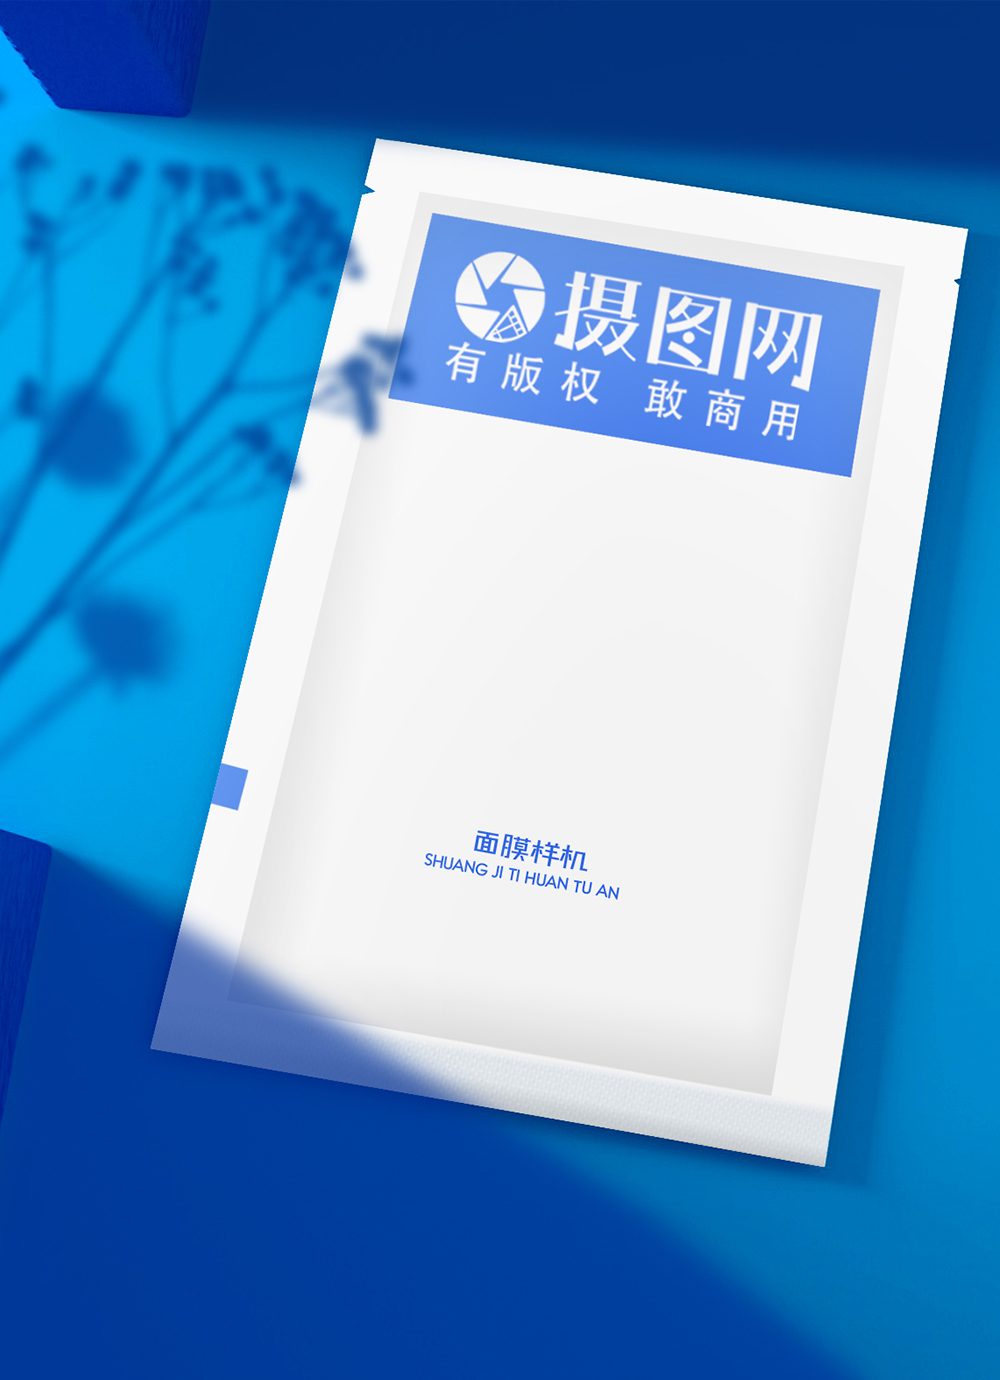 Download Mask Packaging Mockup Template Image Picture Free Download 401746070 Lovepik Com